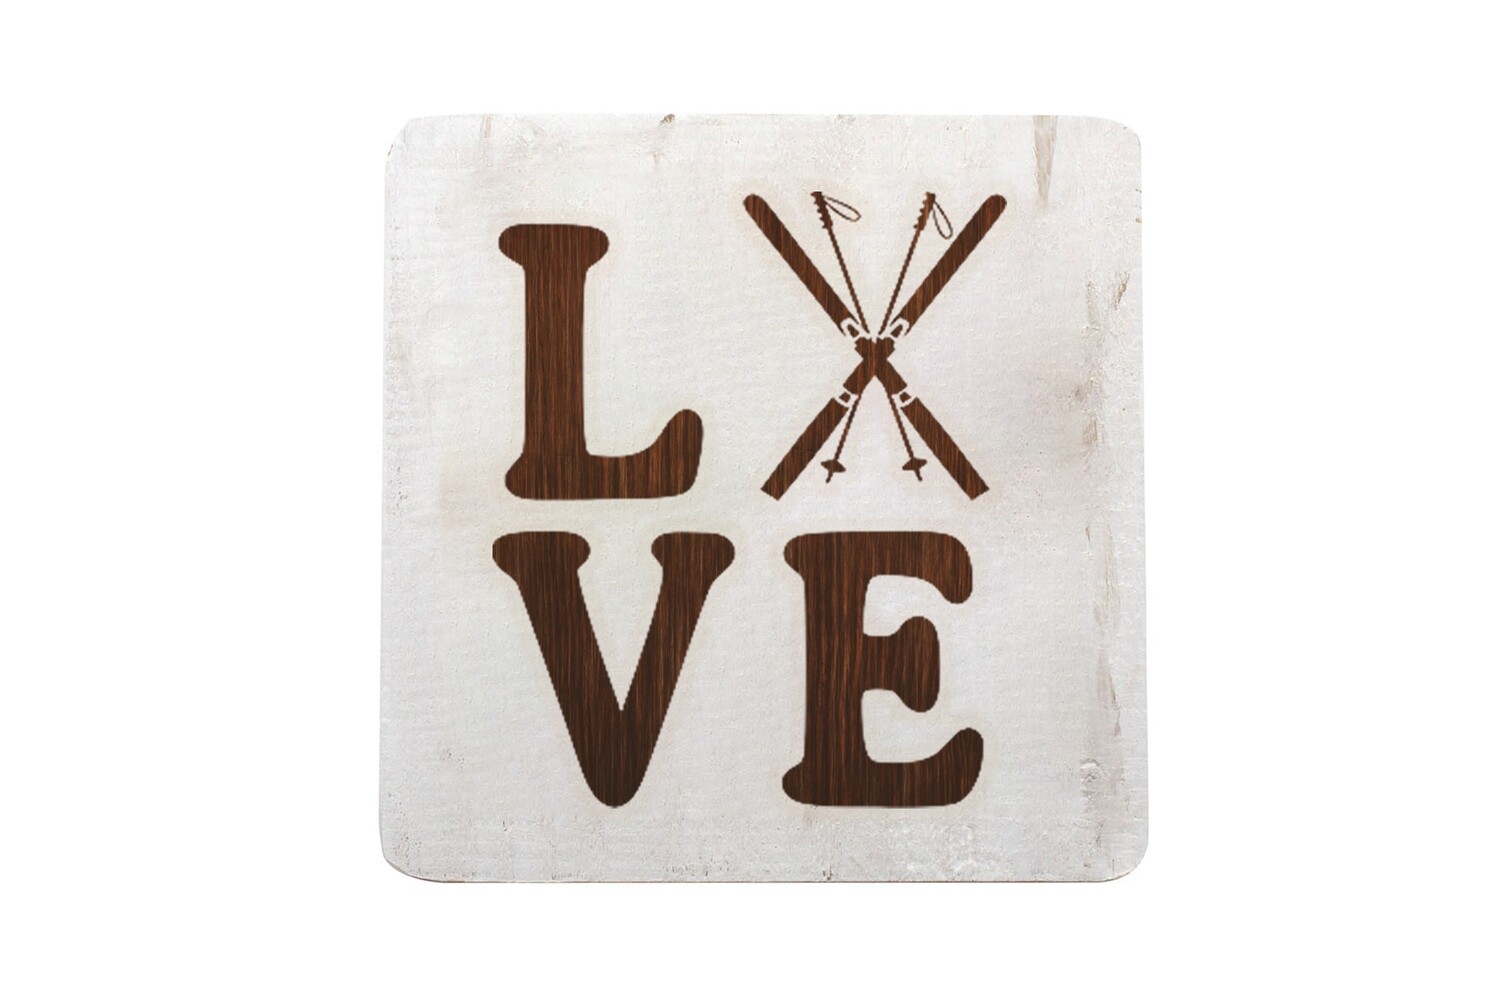 Love with Skis Hand-Painted Wood Coaster Set